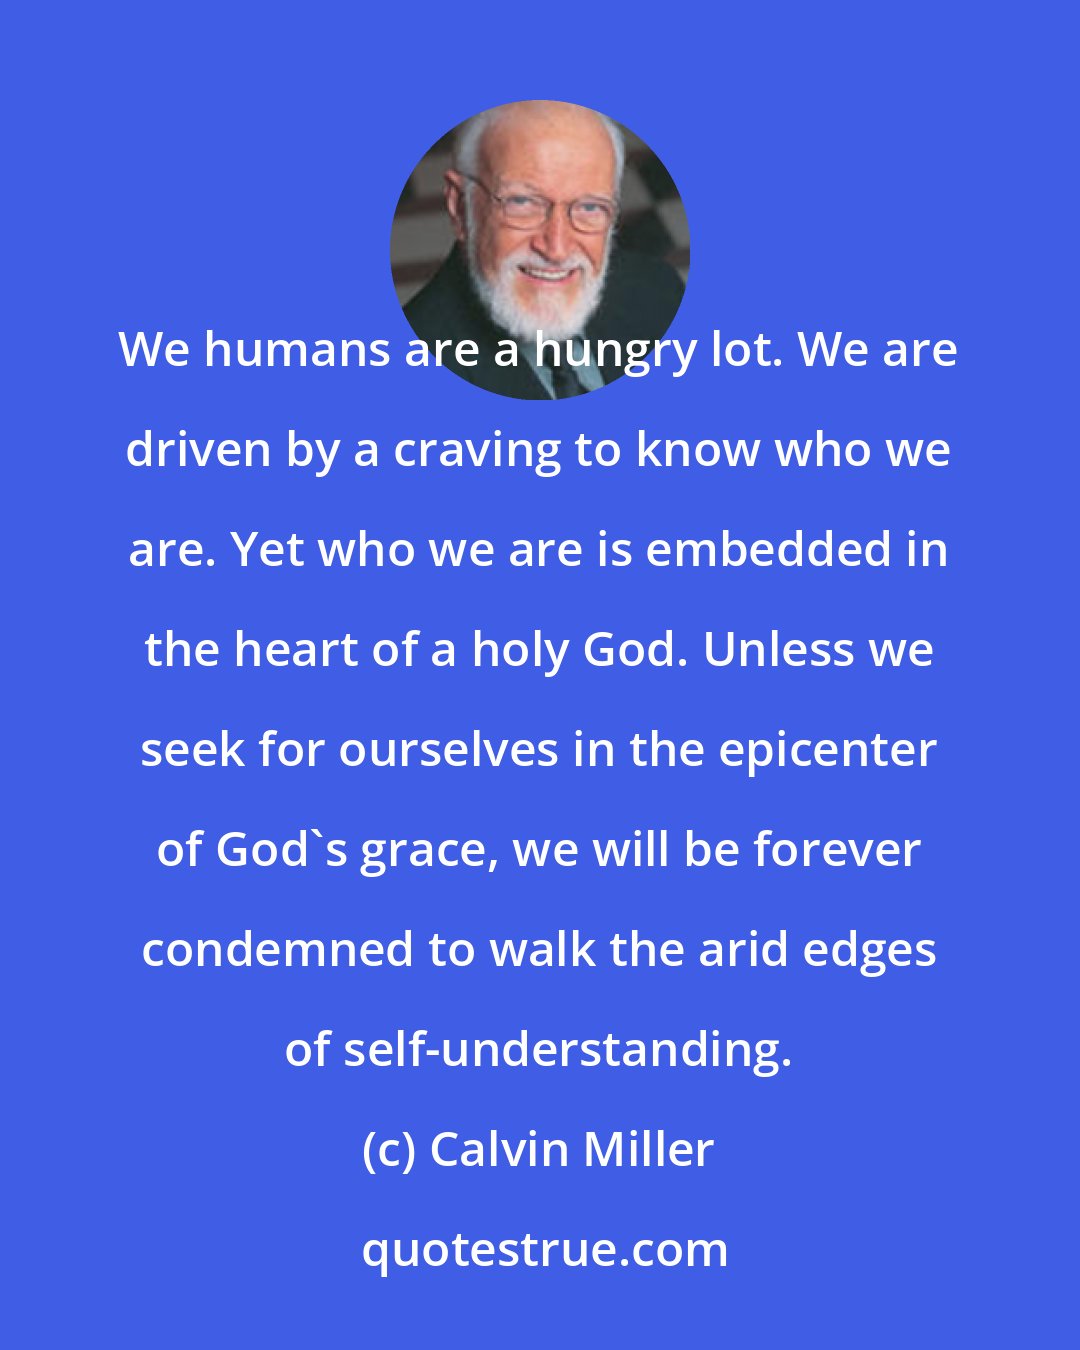 Calvin Miller: We humans are a hungry lot. We are driven by a craving to know who we are. Yet who we are is embedded in the heart of a holy God. Unless we seek for ourselves in the epicenter of God's grace, we will be forever condemned to walk the arid edges of self-understanding.